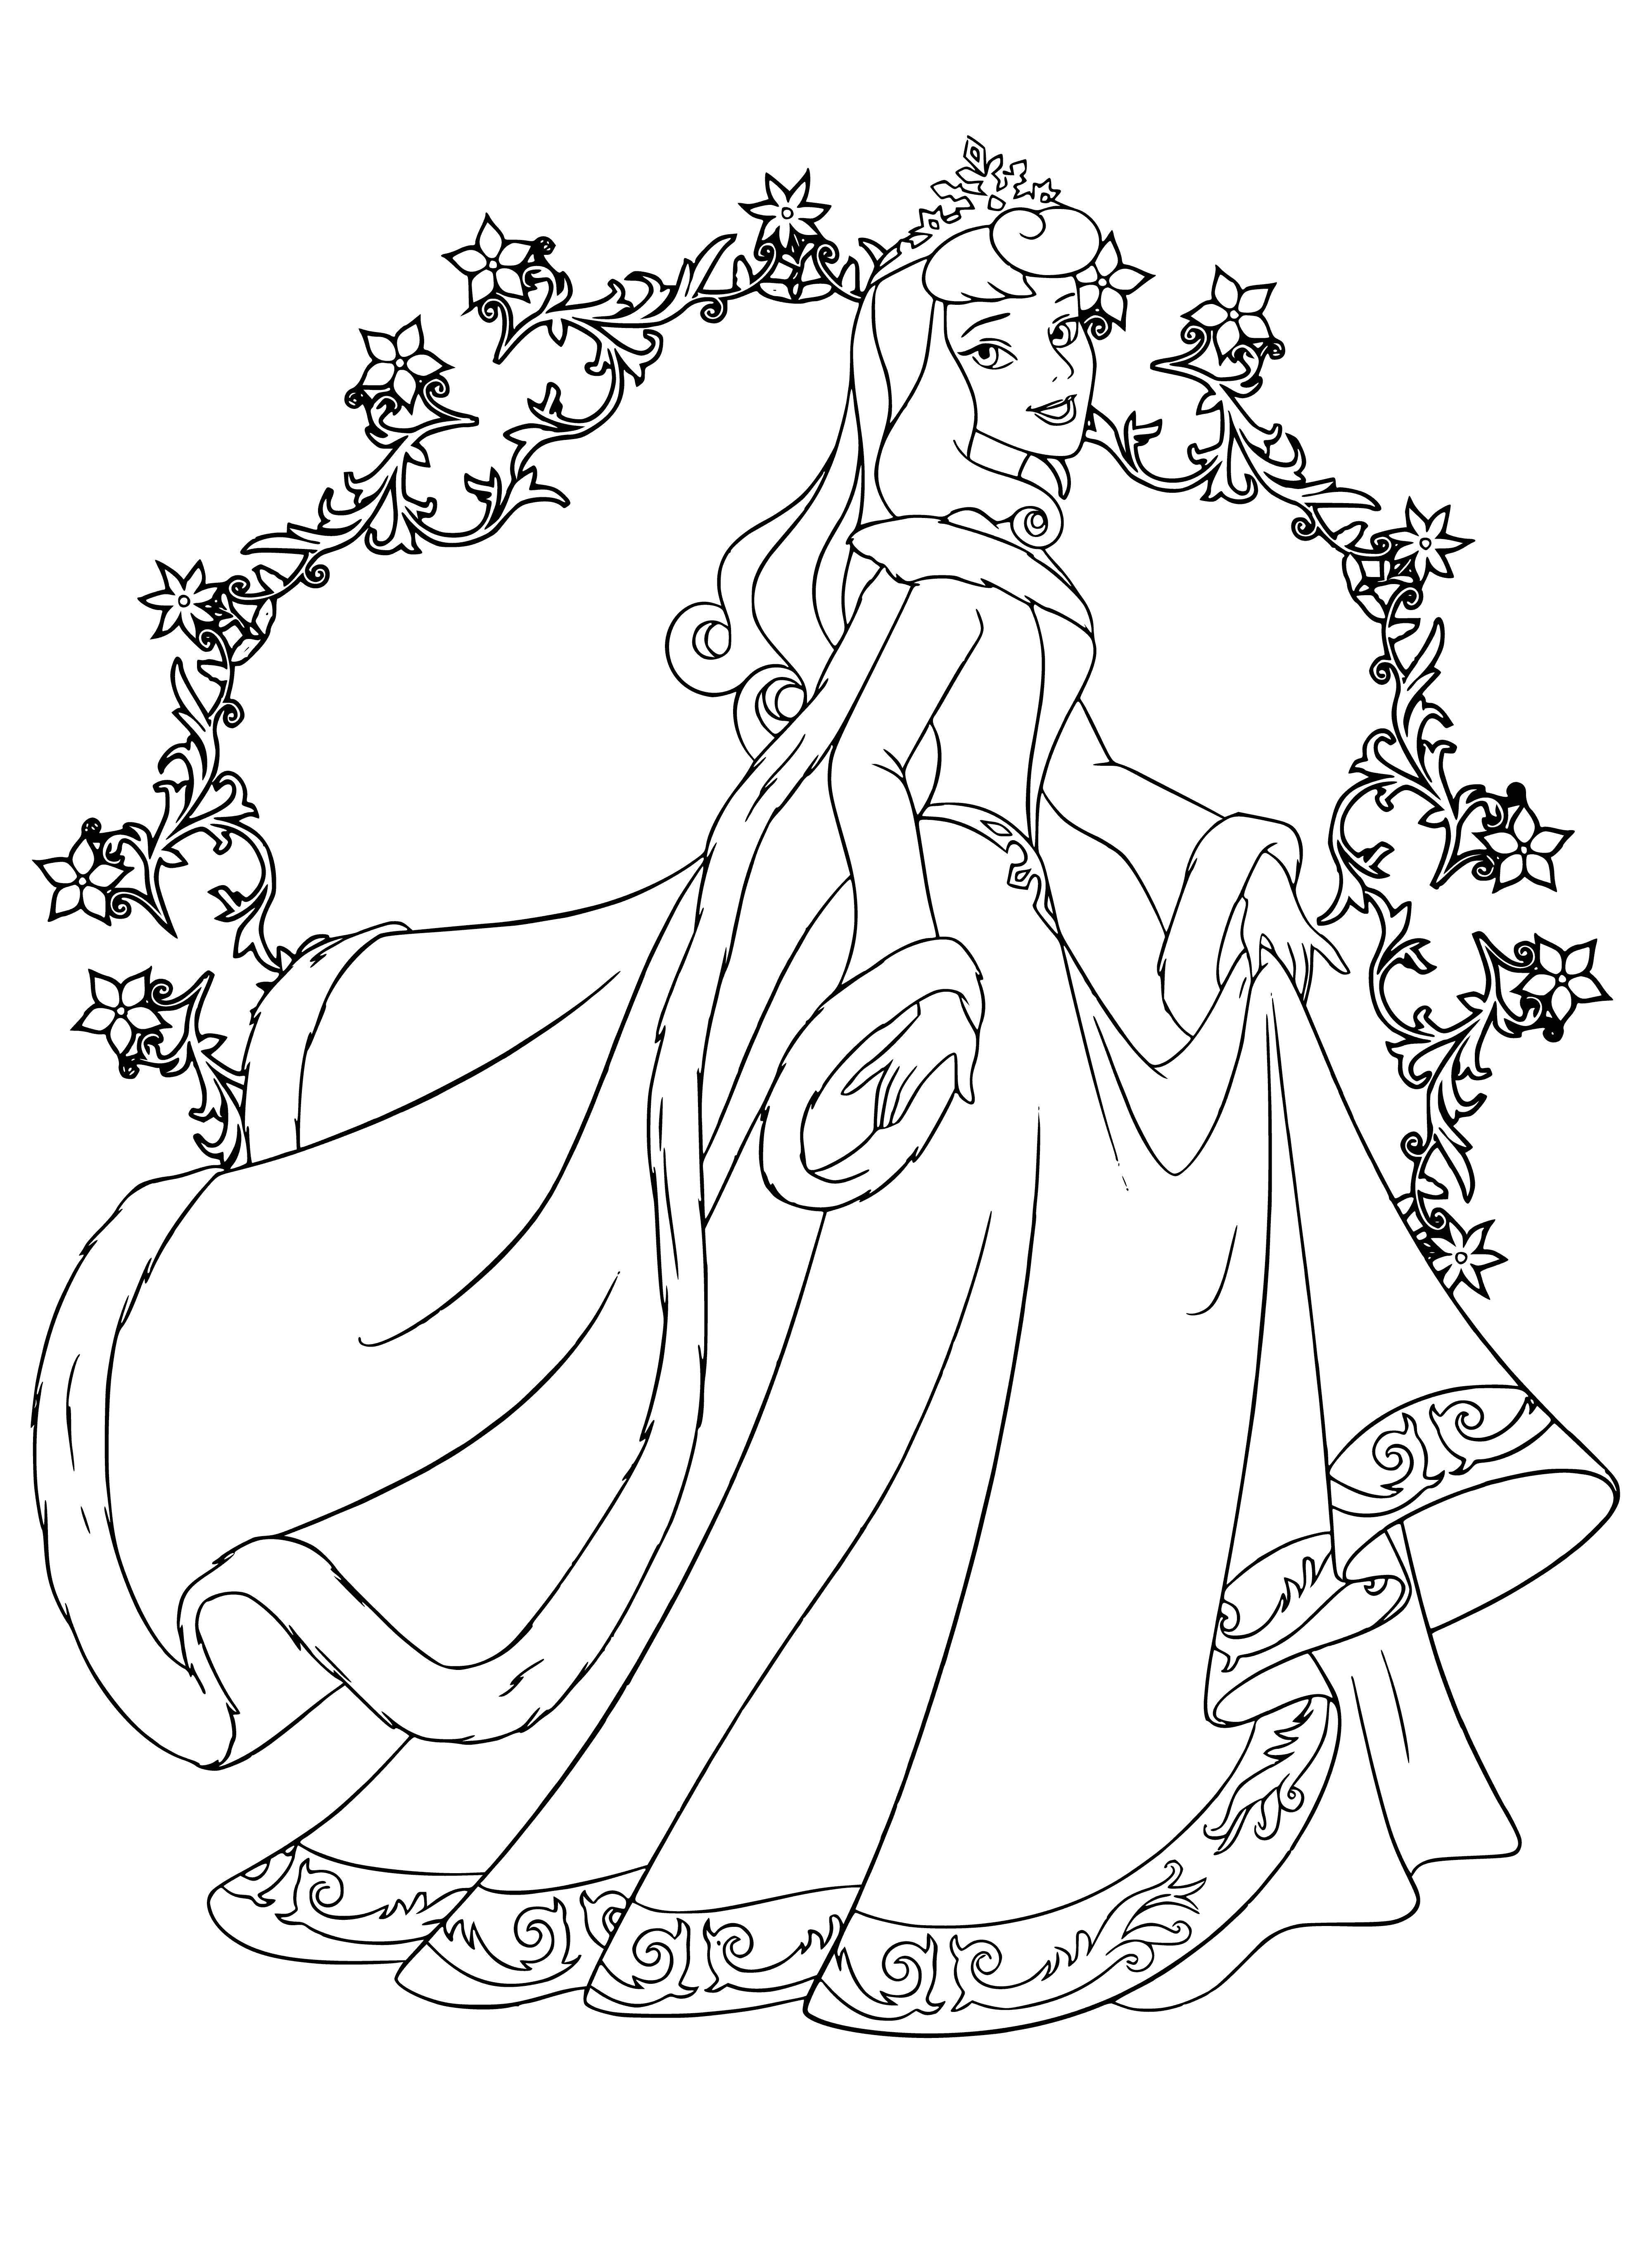 coloring page: Disney princesses celebrate New Year: Aurora wearing white dress, blue belt, cape, tiara and earrings in front of fireplace & Christmas tree.